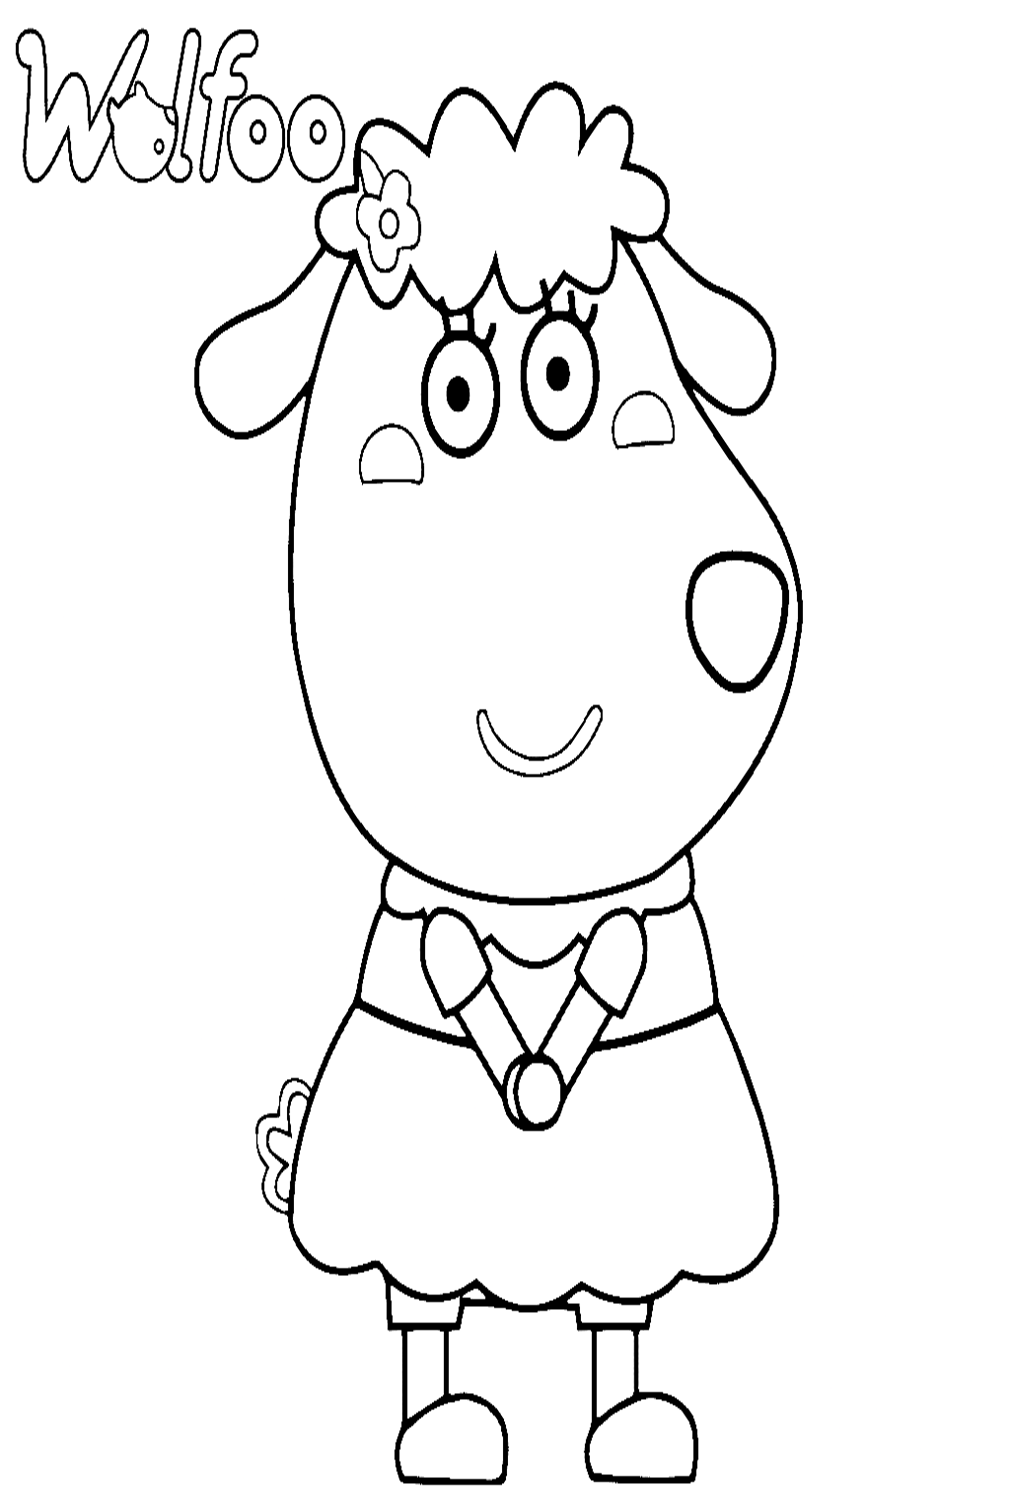 Wolfoo Sheep Coloring Pages